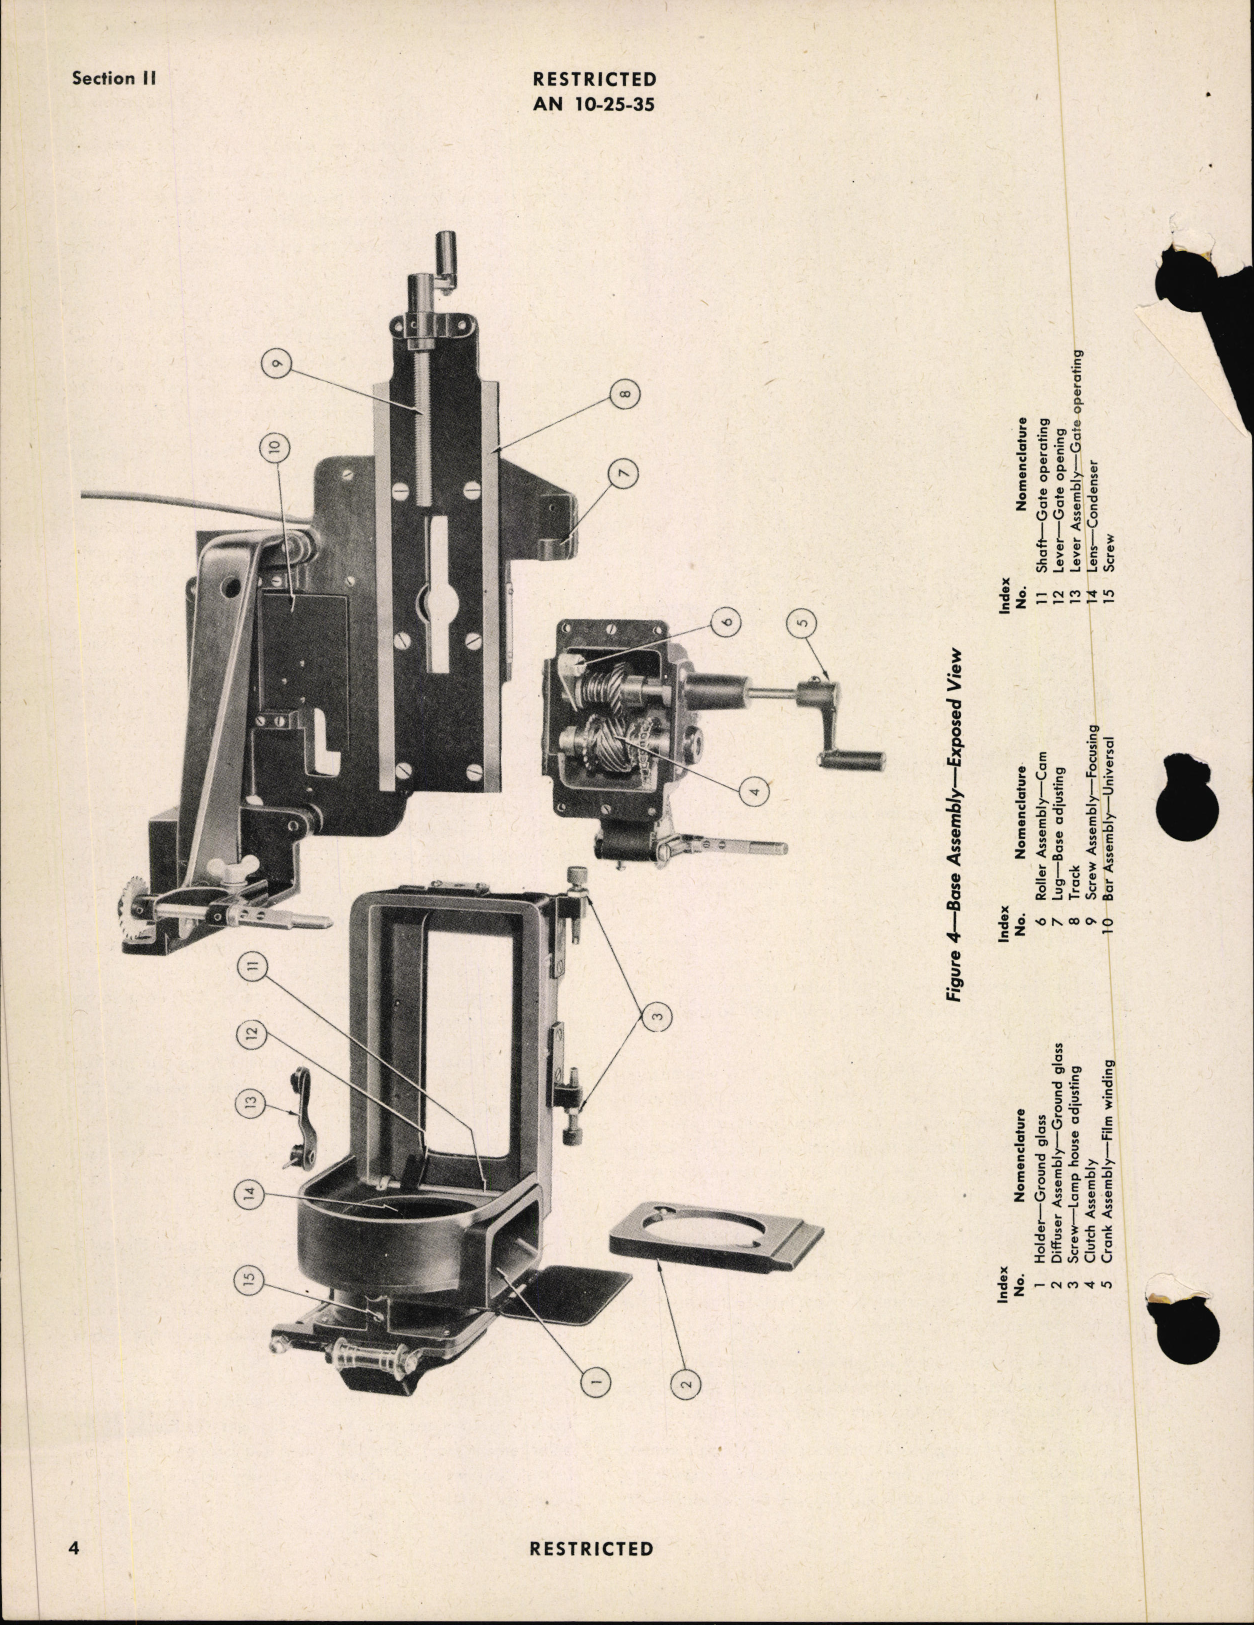 Sample page 8 from AirCorps Library document: Handbook of Instructions with Parts Catalog for Photostat Film Enlarger